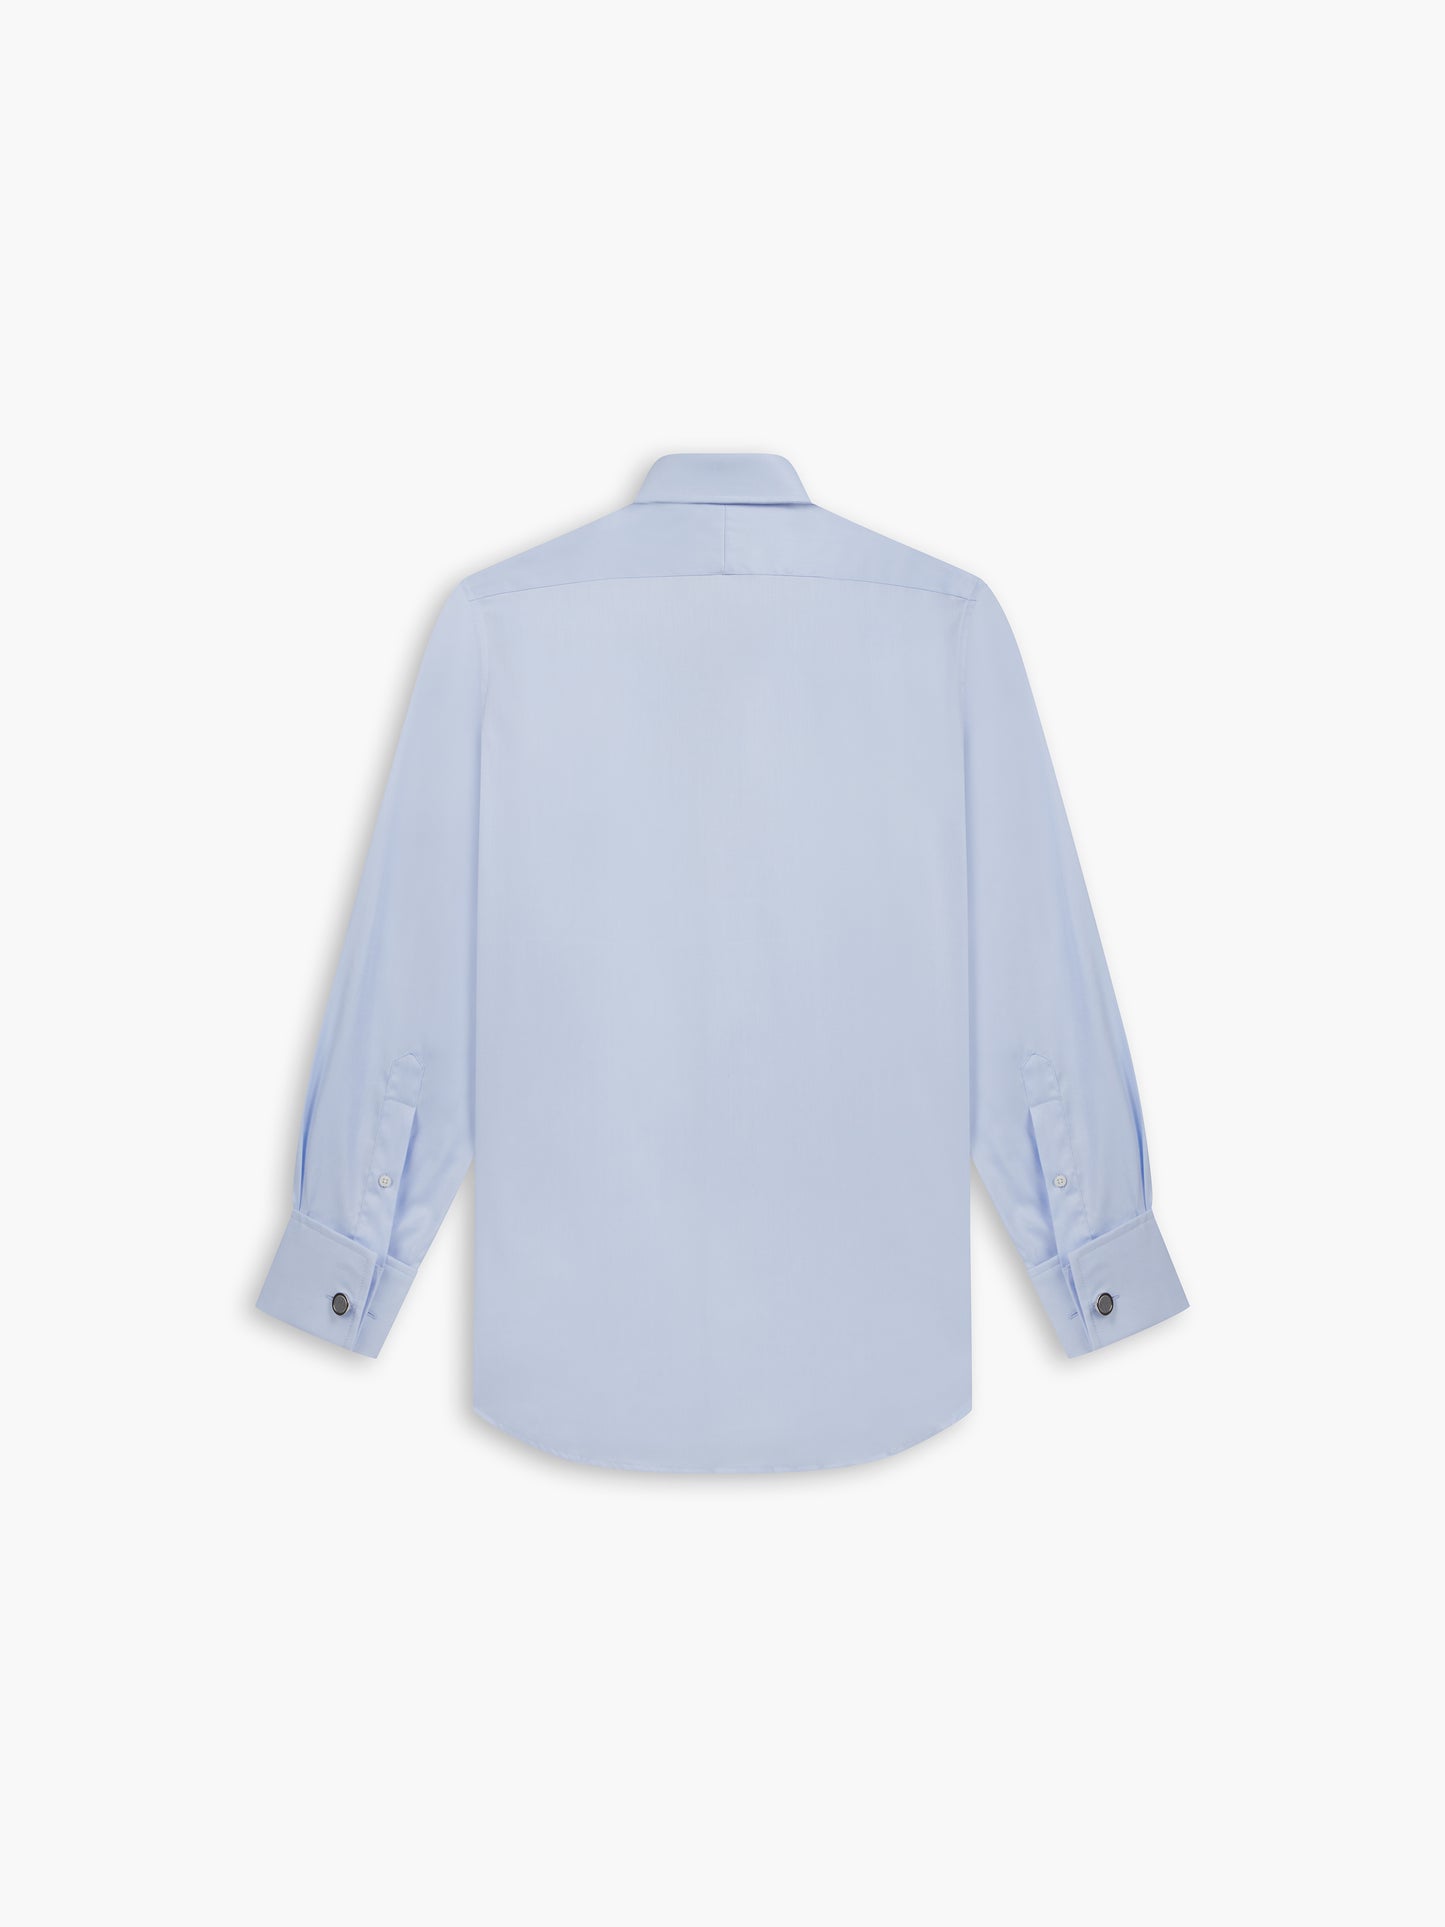 Light Blue Bold Twill Super Fitted Double Cuff Classic Collar Shirt